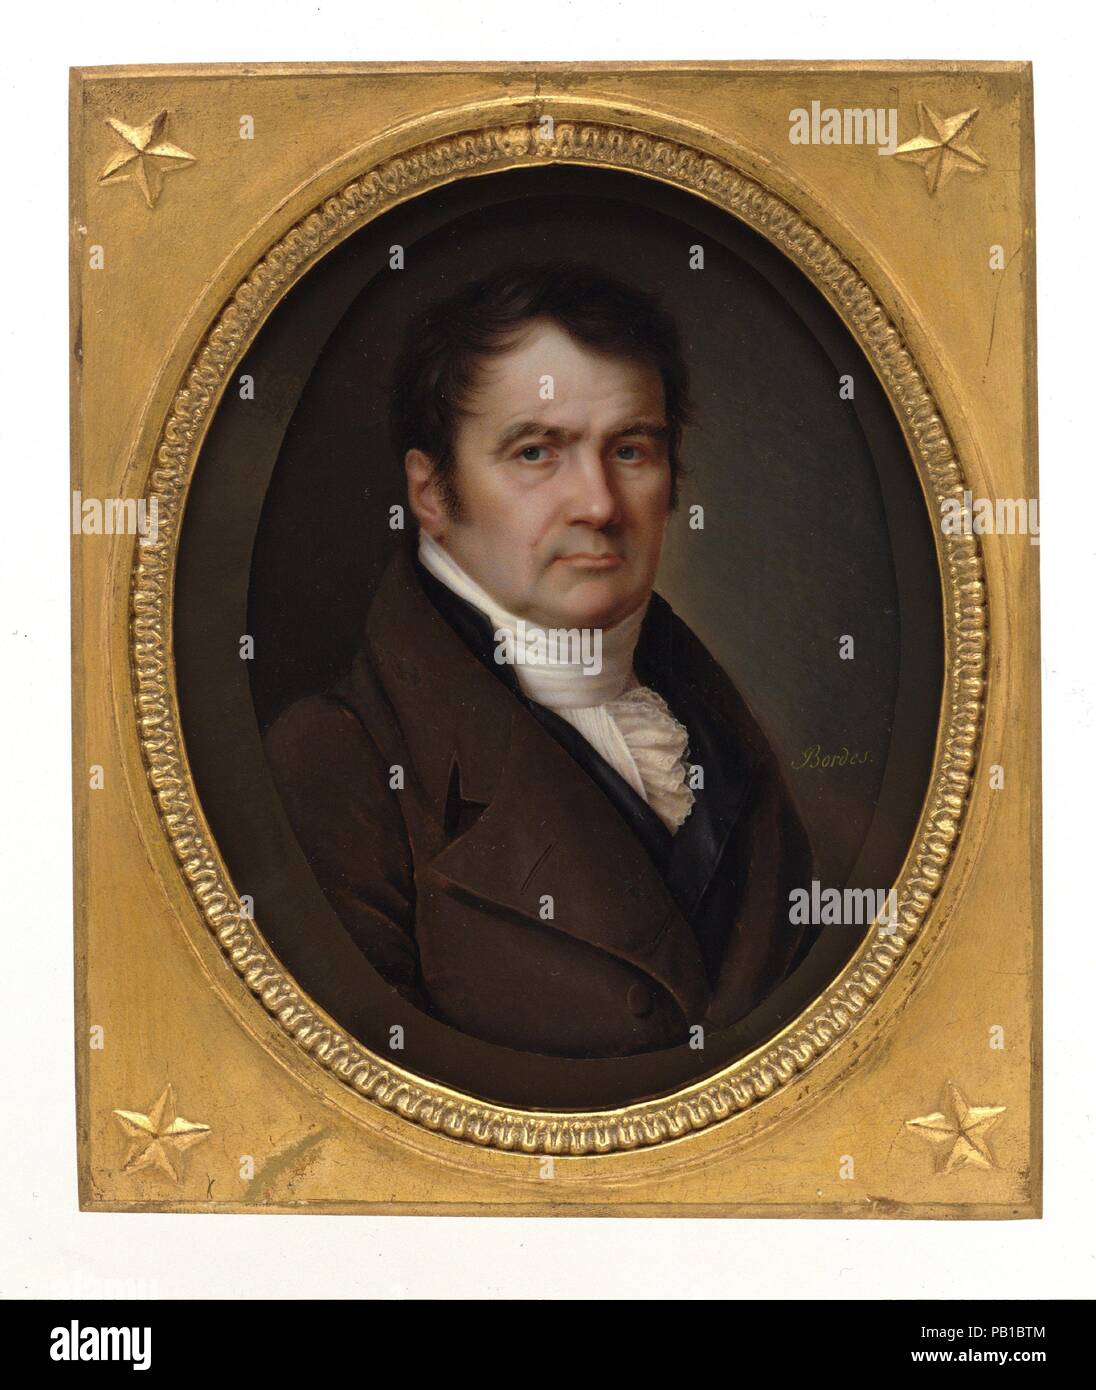 Portrait of a Man. Artist: Joseph Bordes (French, 1773-after 1835). Dimensions: Oval, 7 1/8 x 5 7/8 in. (181 x 149 mm). Date: ca. 1810. Museum: Metropolitan Museum of Art, New York, USA. Stock Photo